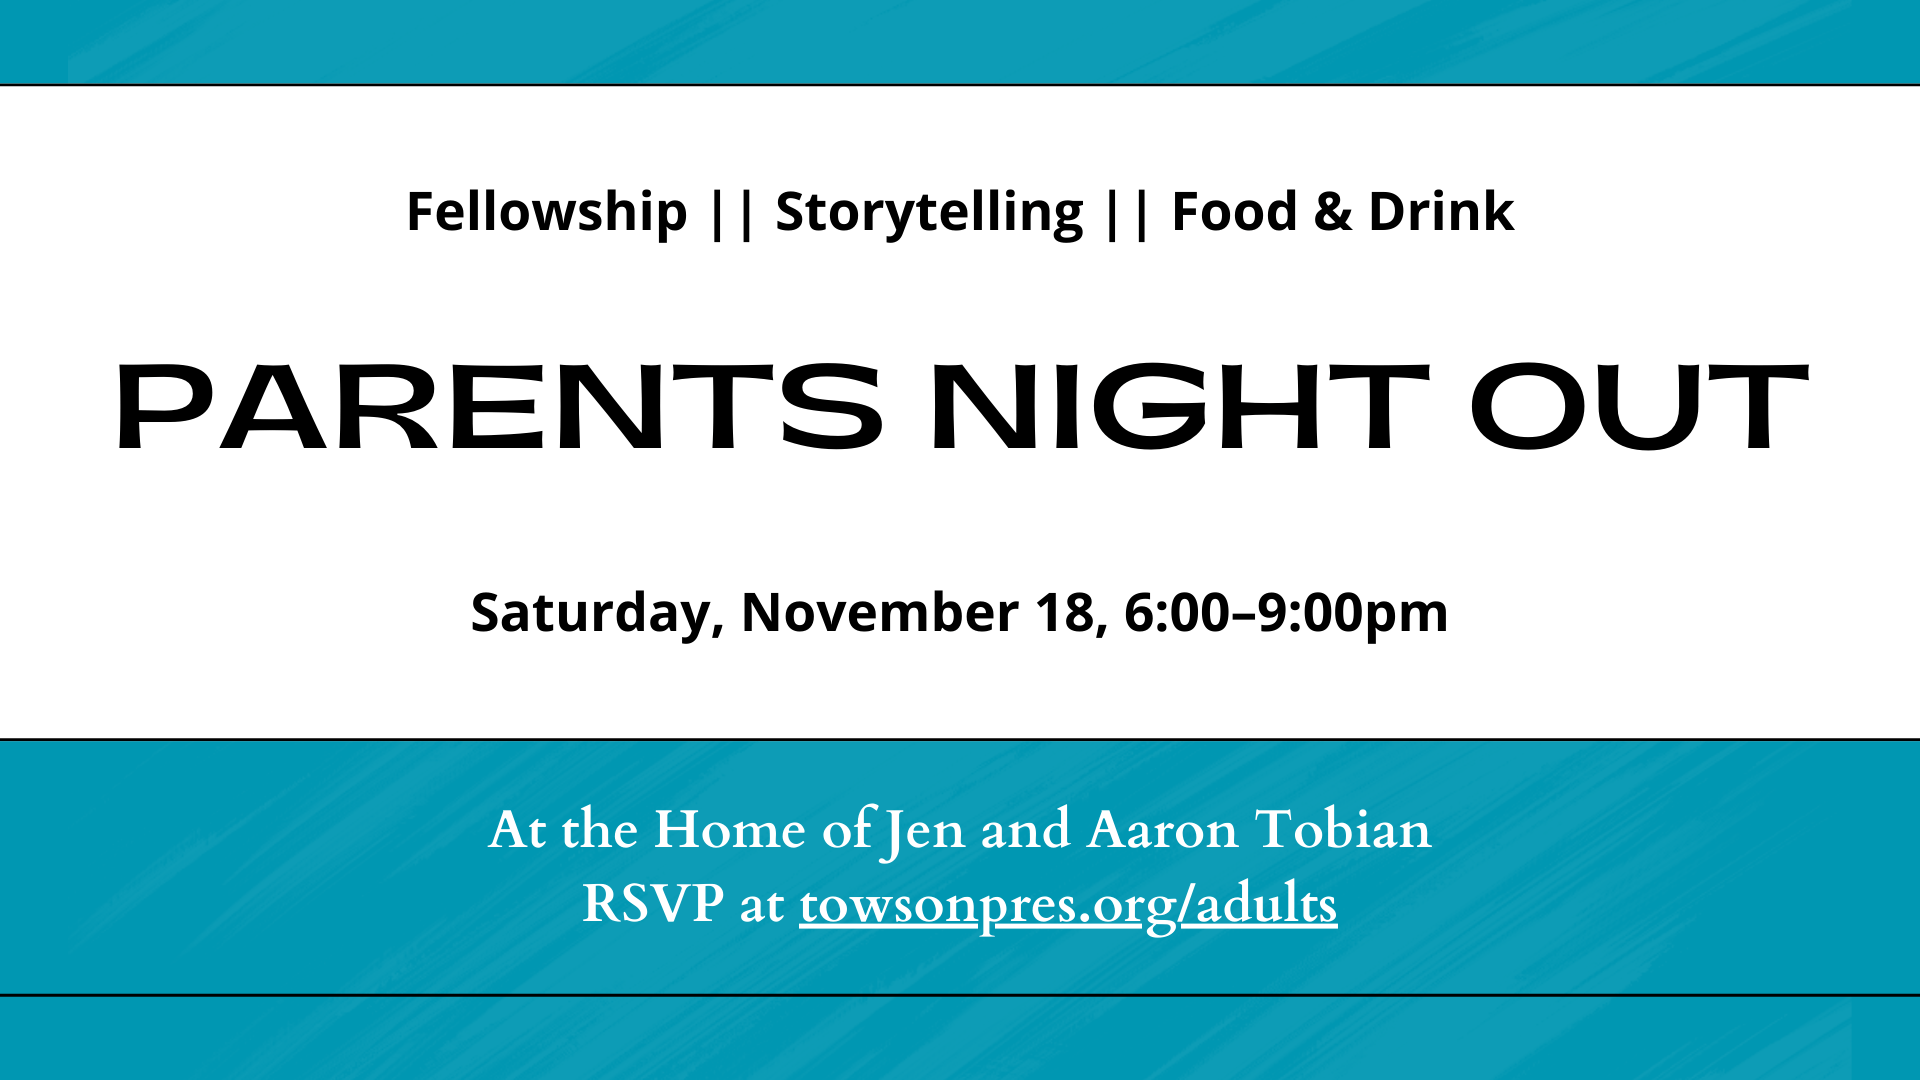 Graphic that reads: "Fellowship | Storytelling | Food & Drink. PARENTS NIGHT OUT. Saturday, November 18, 6:00-9:00pm. At the Home of Jen and Aaron Tobian. RSVP at towsonpres.org/adults